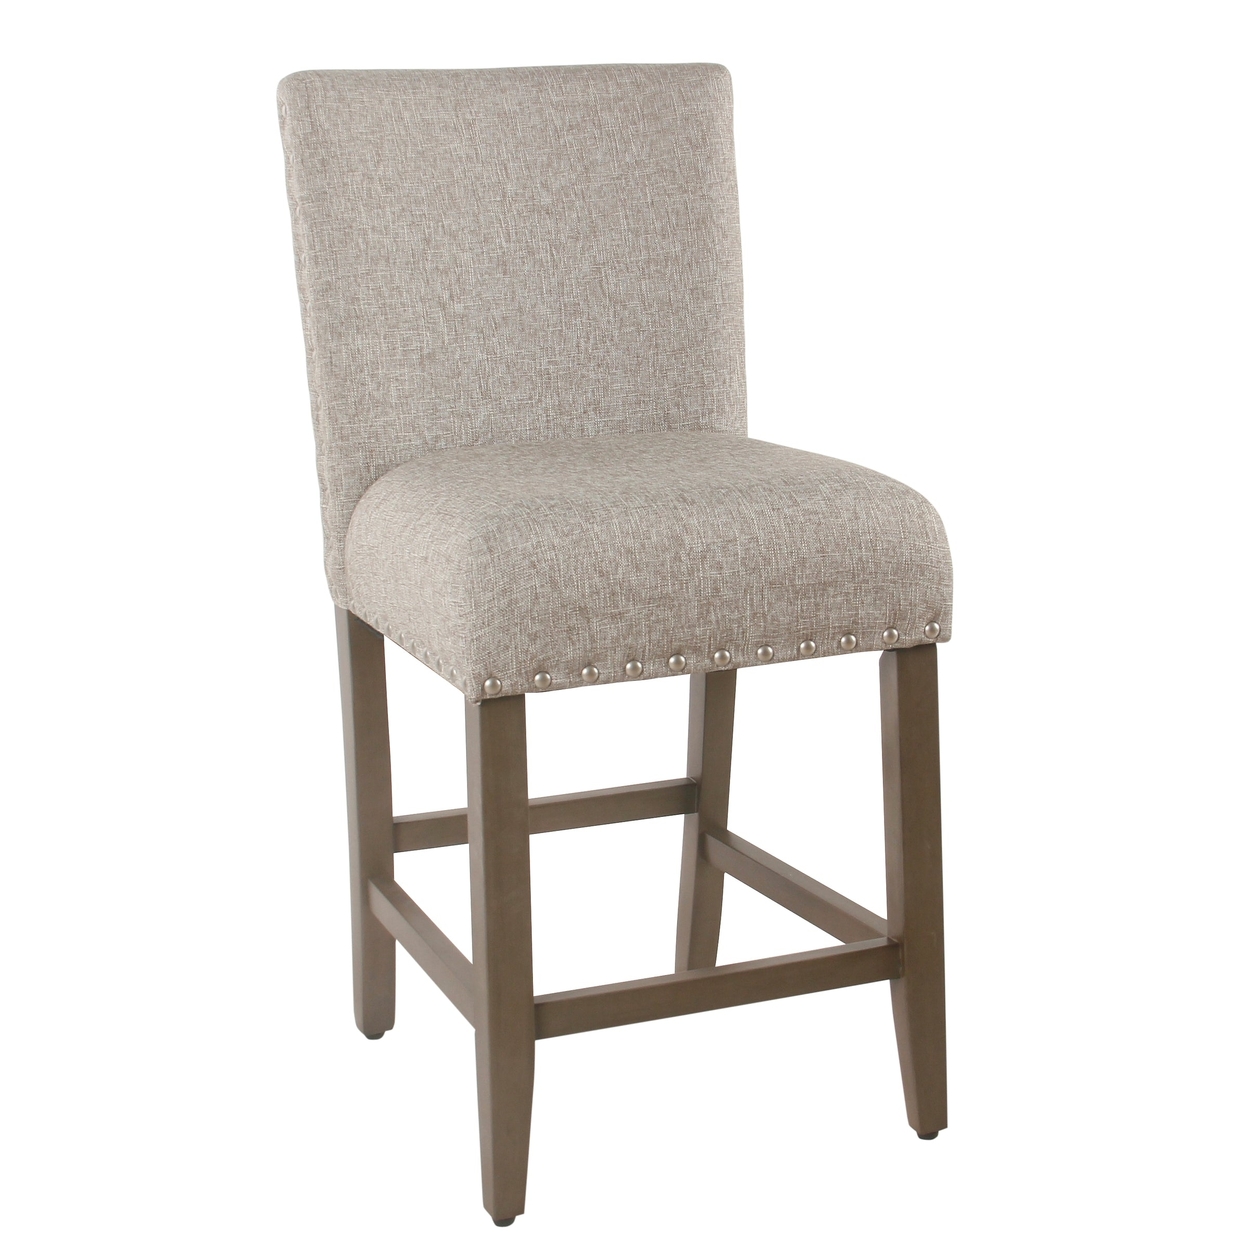 Fabric Upholstered Wooden Counter Stool With Striking Nail Head Trims, Gray And Brown- Saltoro Sherpi